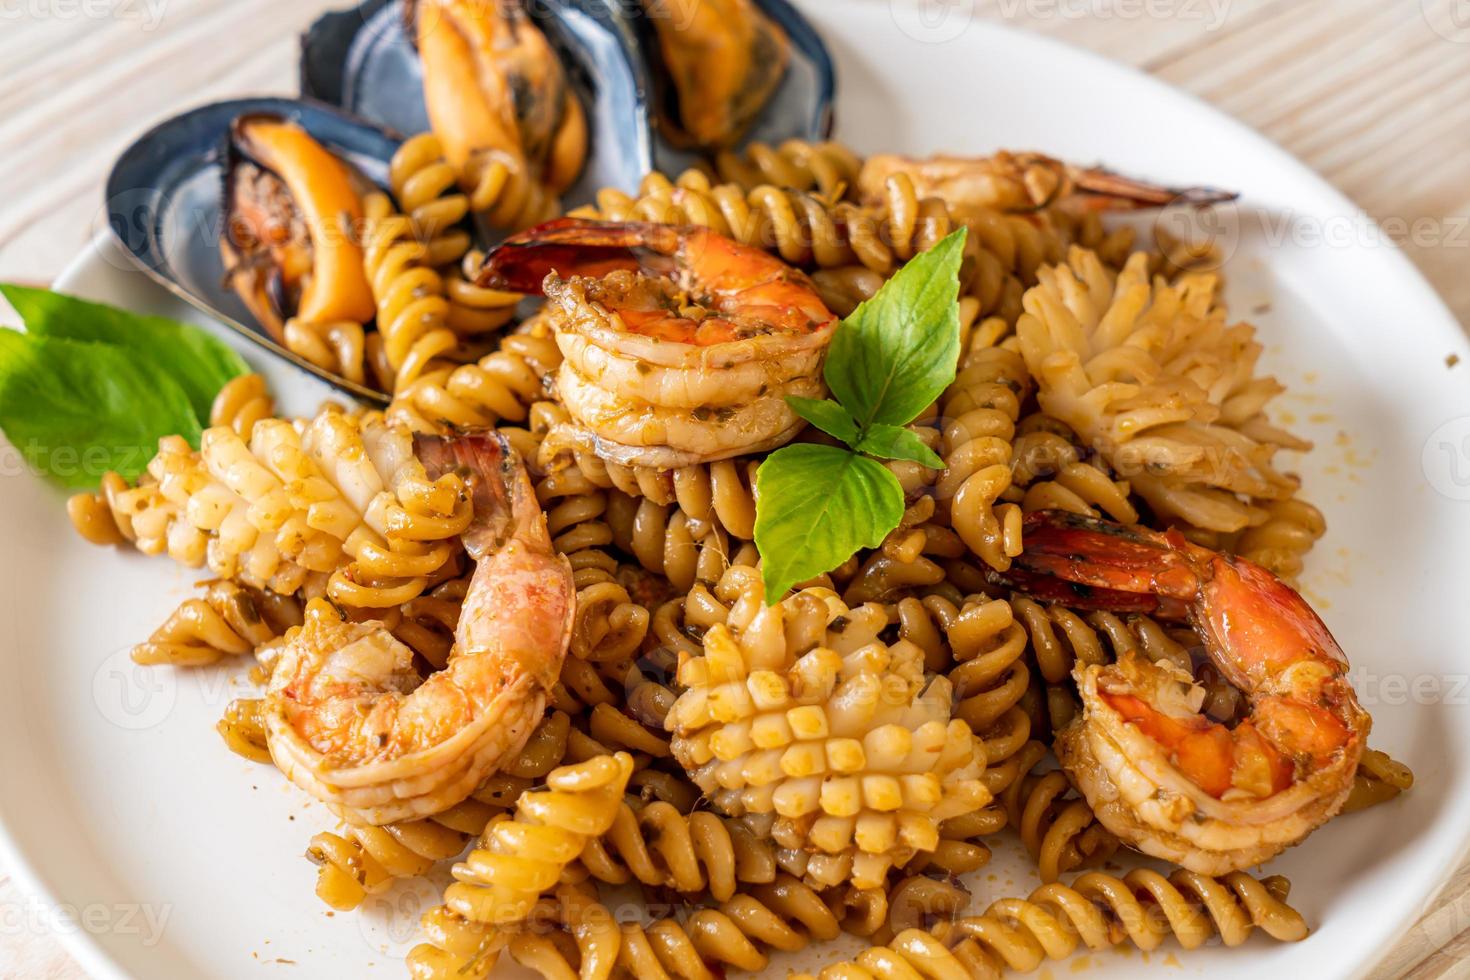 Stir-fried spiral pasta with seafood and basil sauce - fusion food style photo